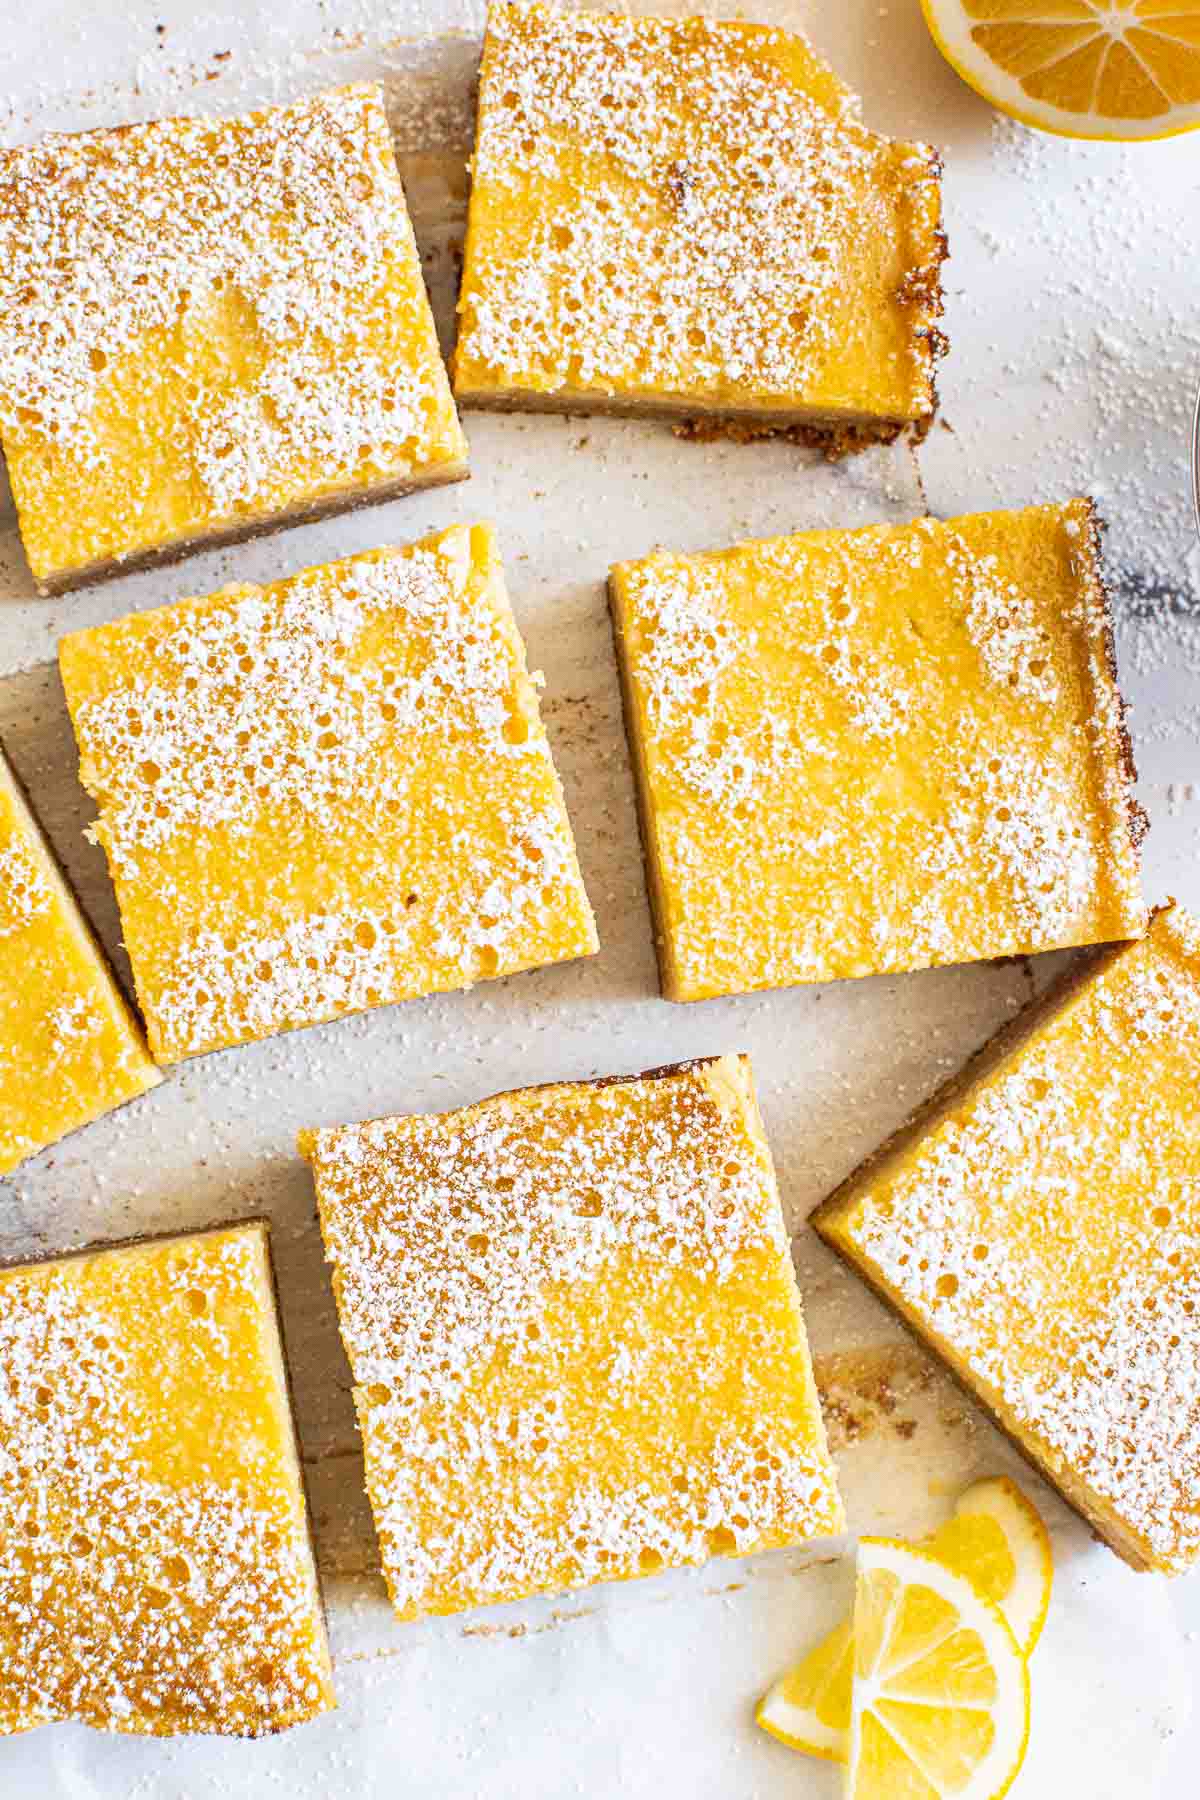 Healthy lemon bars dusted with icing sugar on a counter.